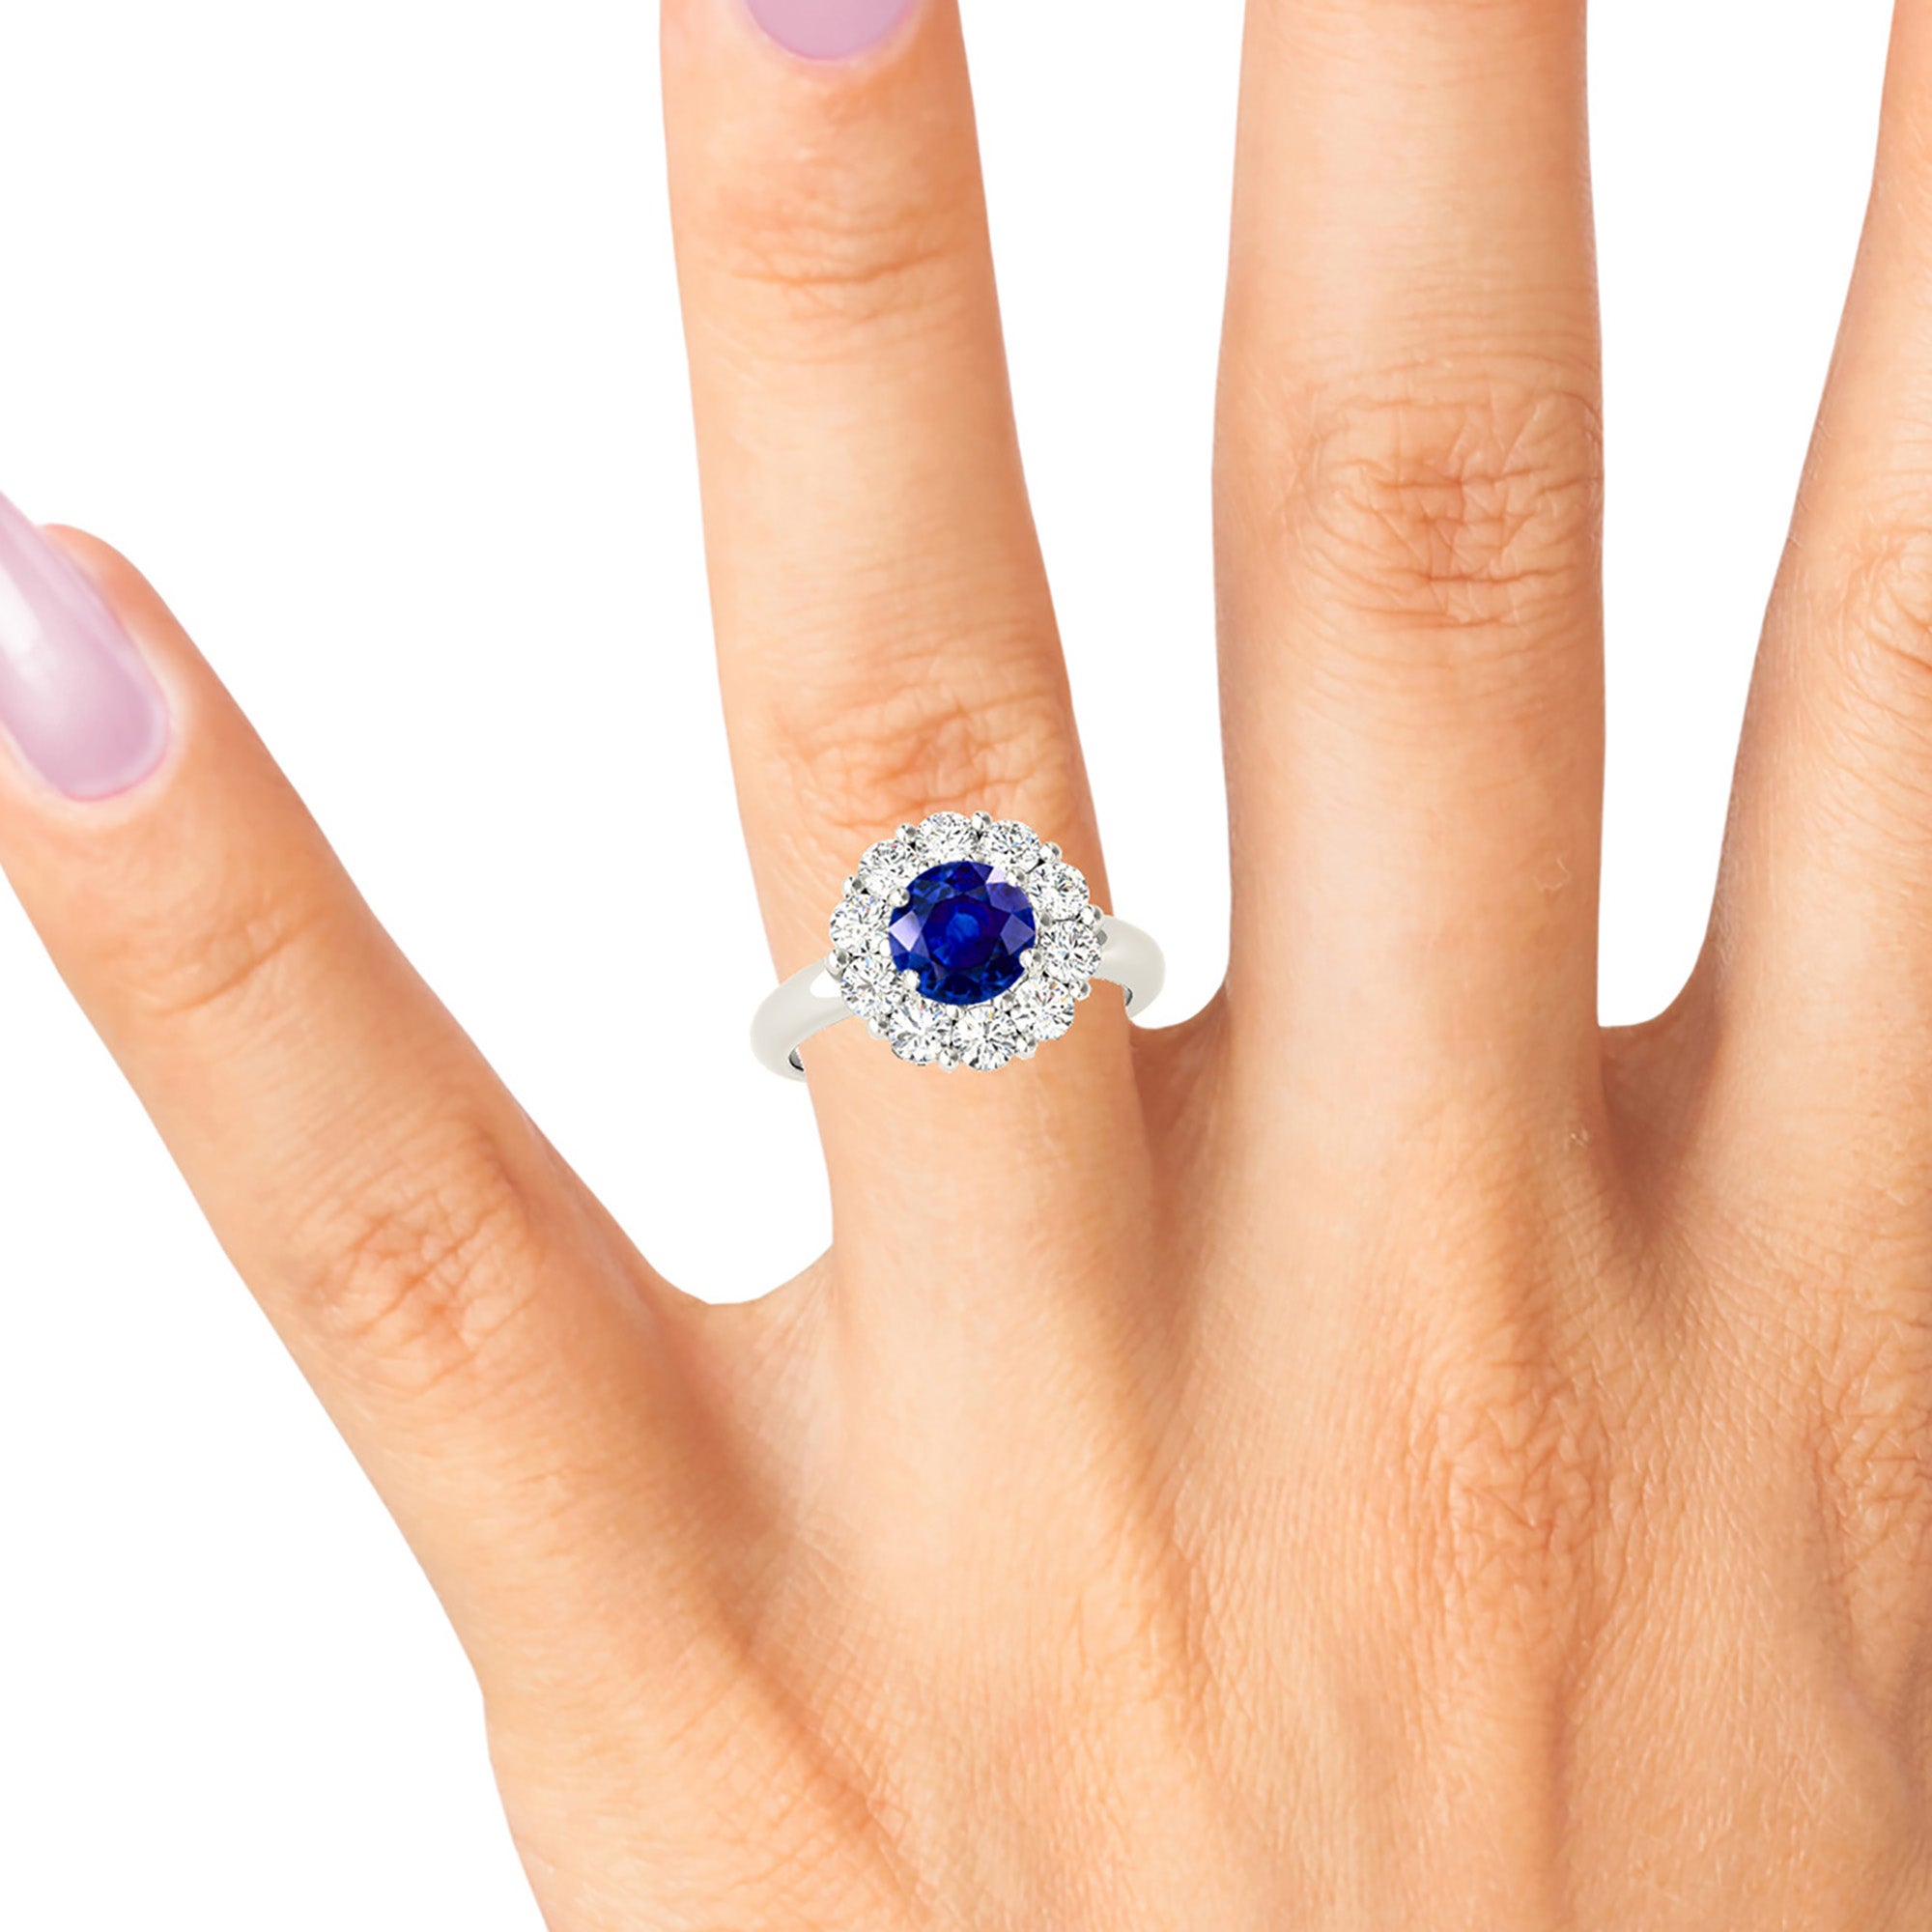 1.80 ct. Genuine Blue Sapphire Halo Ring with 1.15 ctw. Diamonds on Halo-in 14K/18K White, Yellow, Rose Gold and Platinum - Christmas Jewelry Gift -VIRABYANI